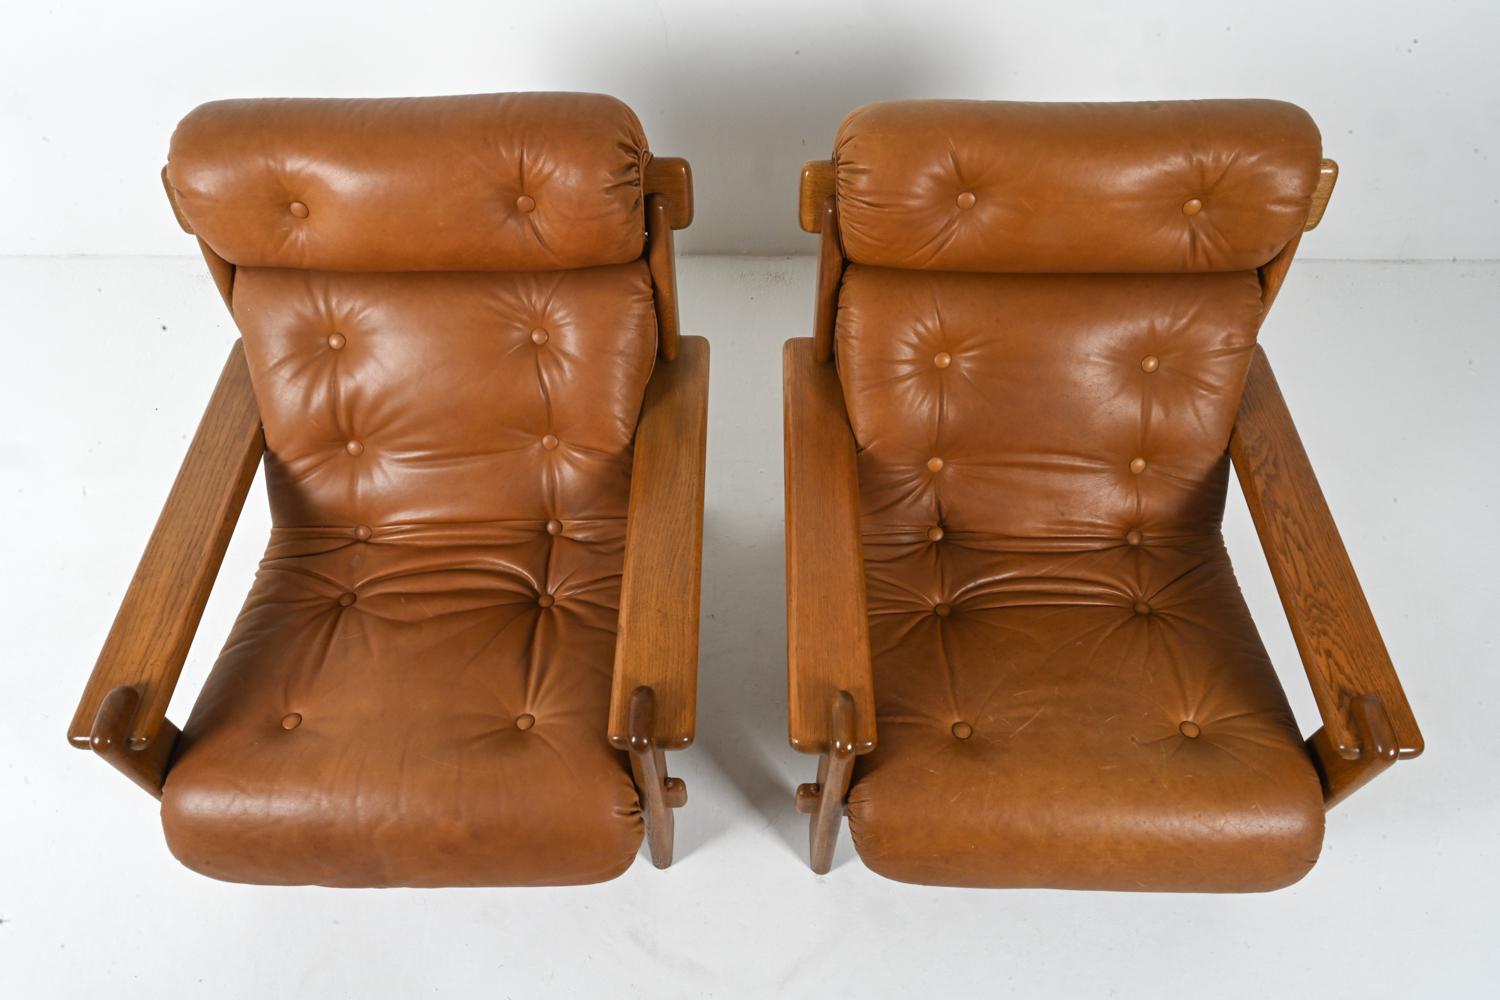 Pair of European Brutalist Armchairs in Oak & Leather, c. 1970's For Sale 1